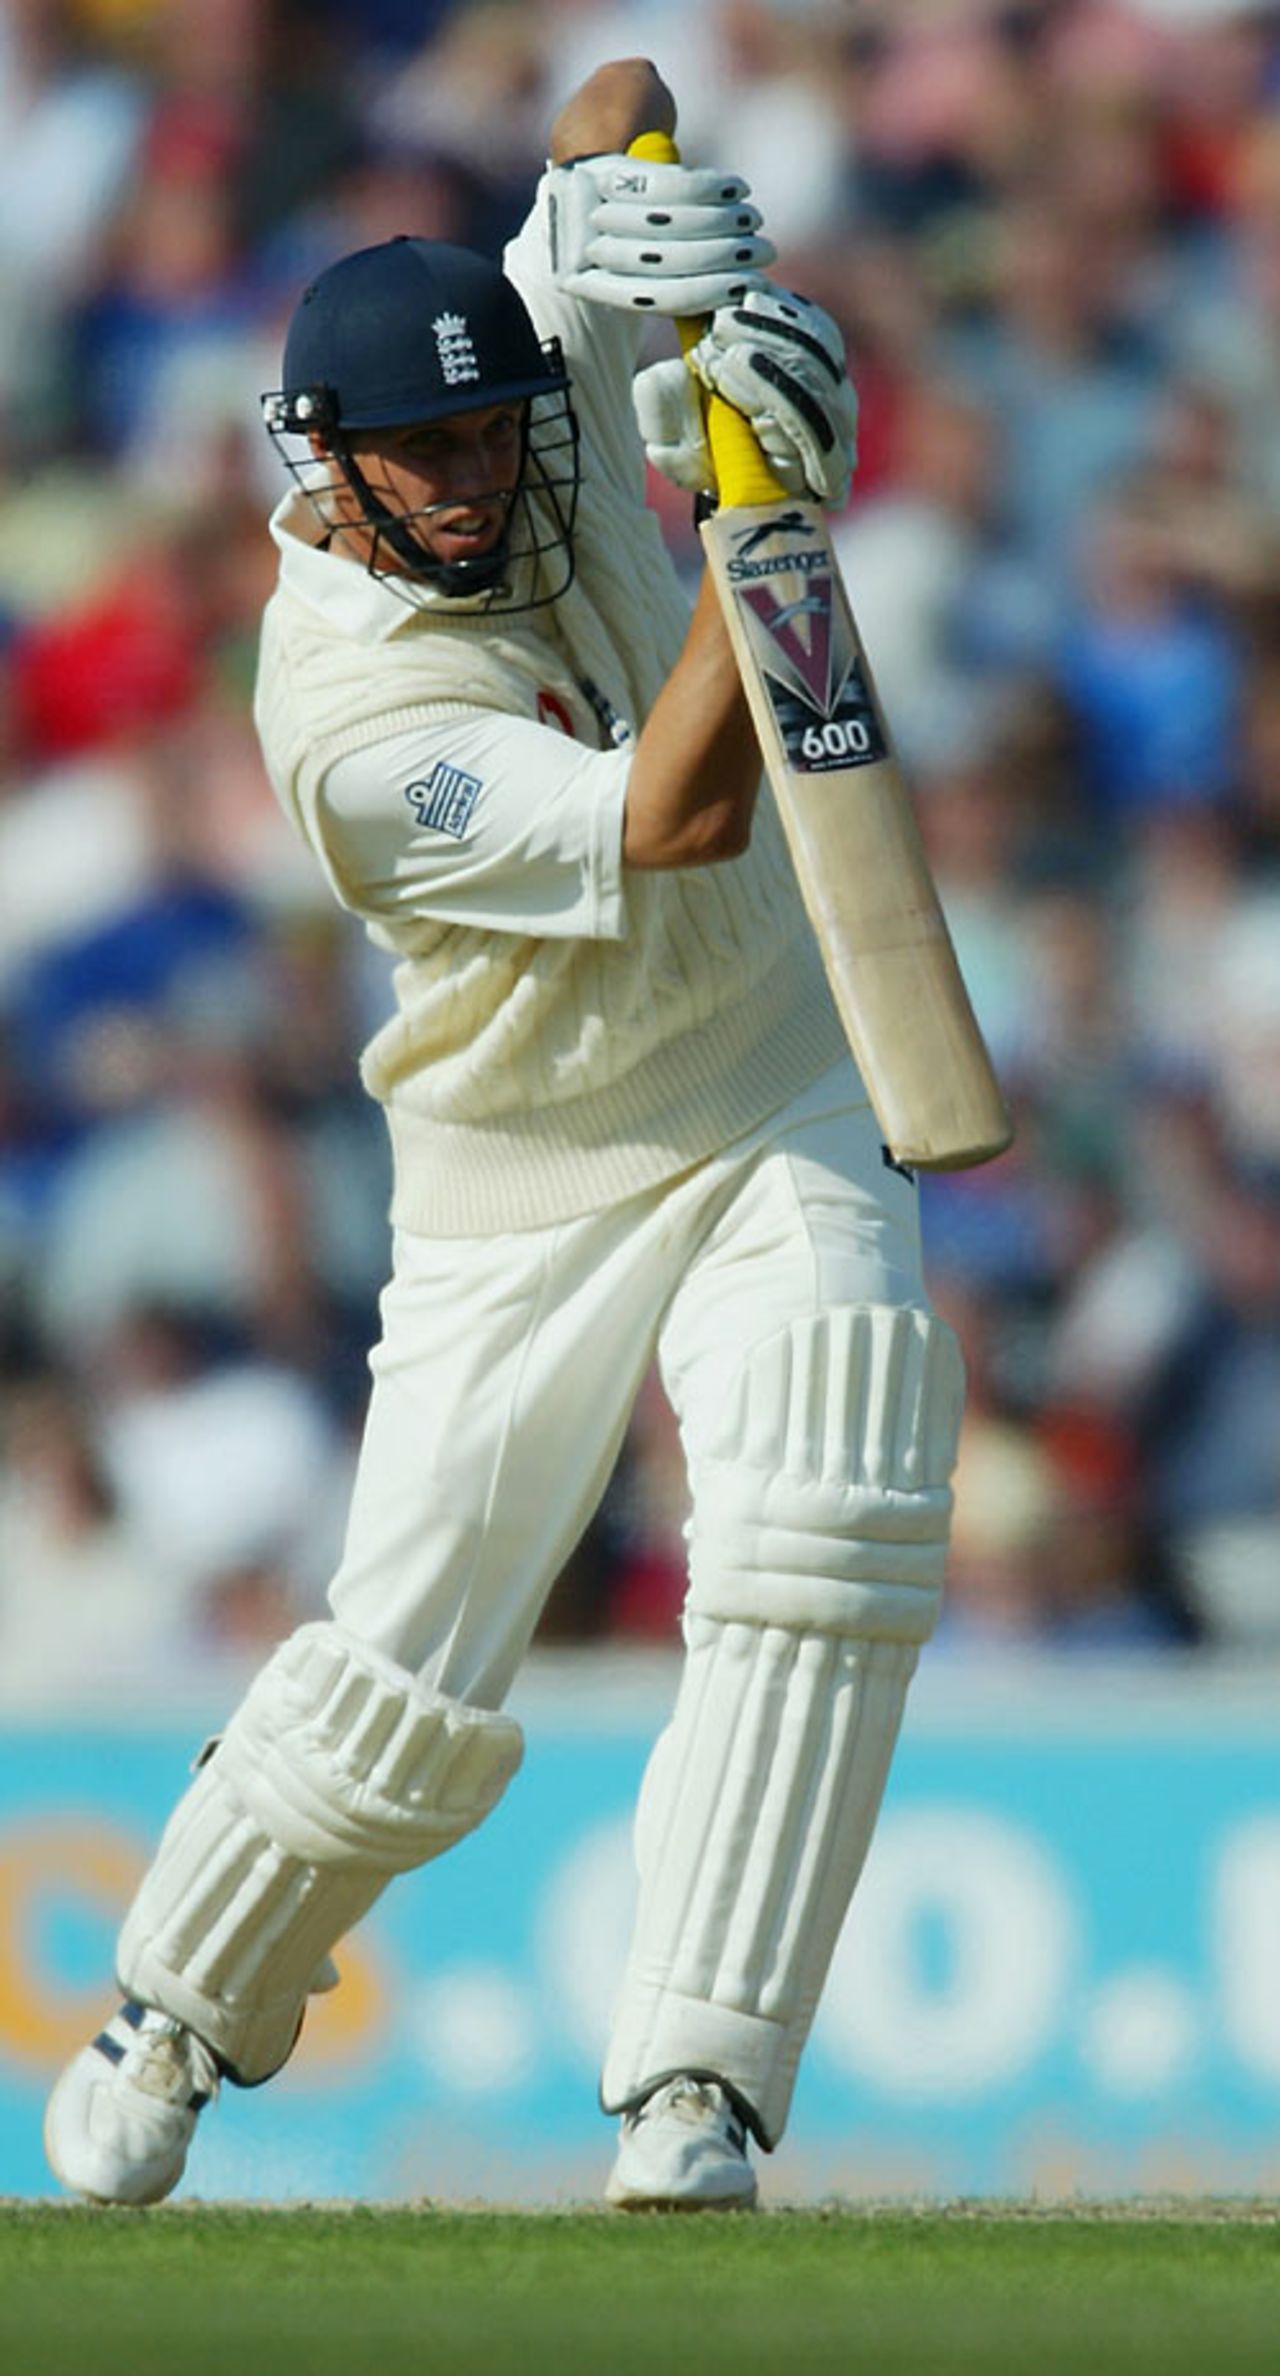 A classical cover drive from Ed Smith, England v South Africa, 5th Test, The Oval, September 3, 2003